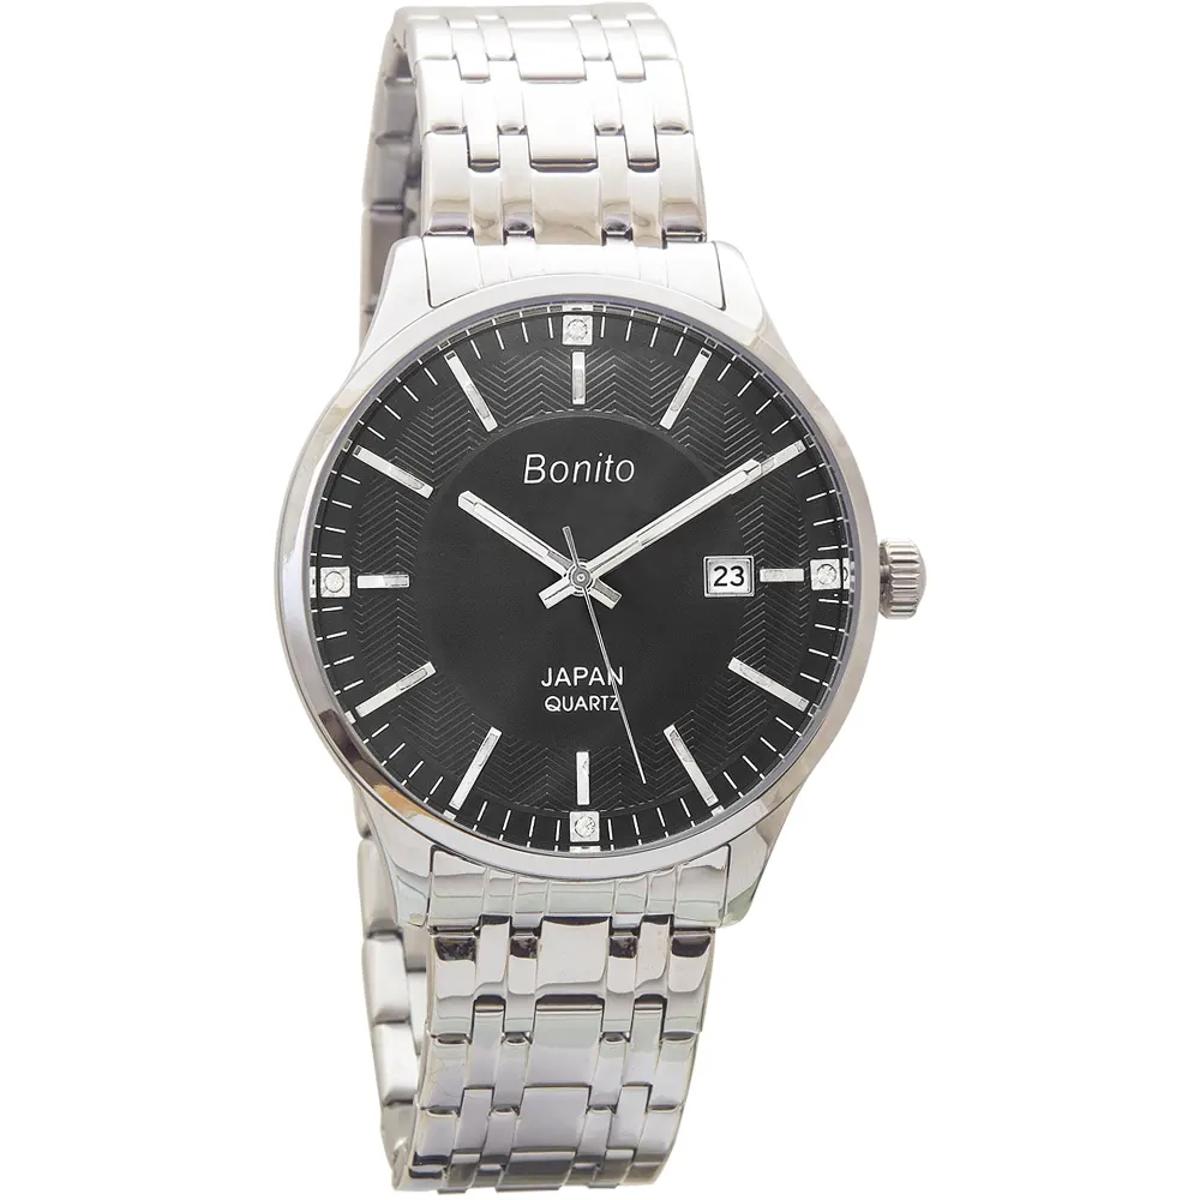 Bonito Q-1021 St Blk Stainless Steel Wrist Watch For Woman Price in  Pakistan - View Latest Collection of Analog